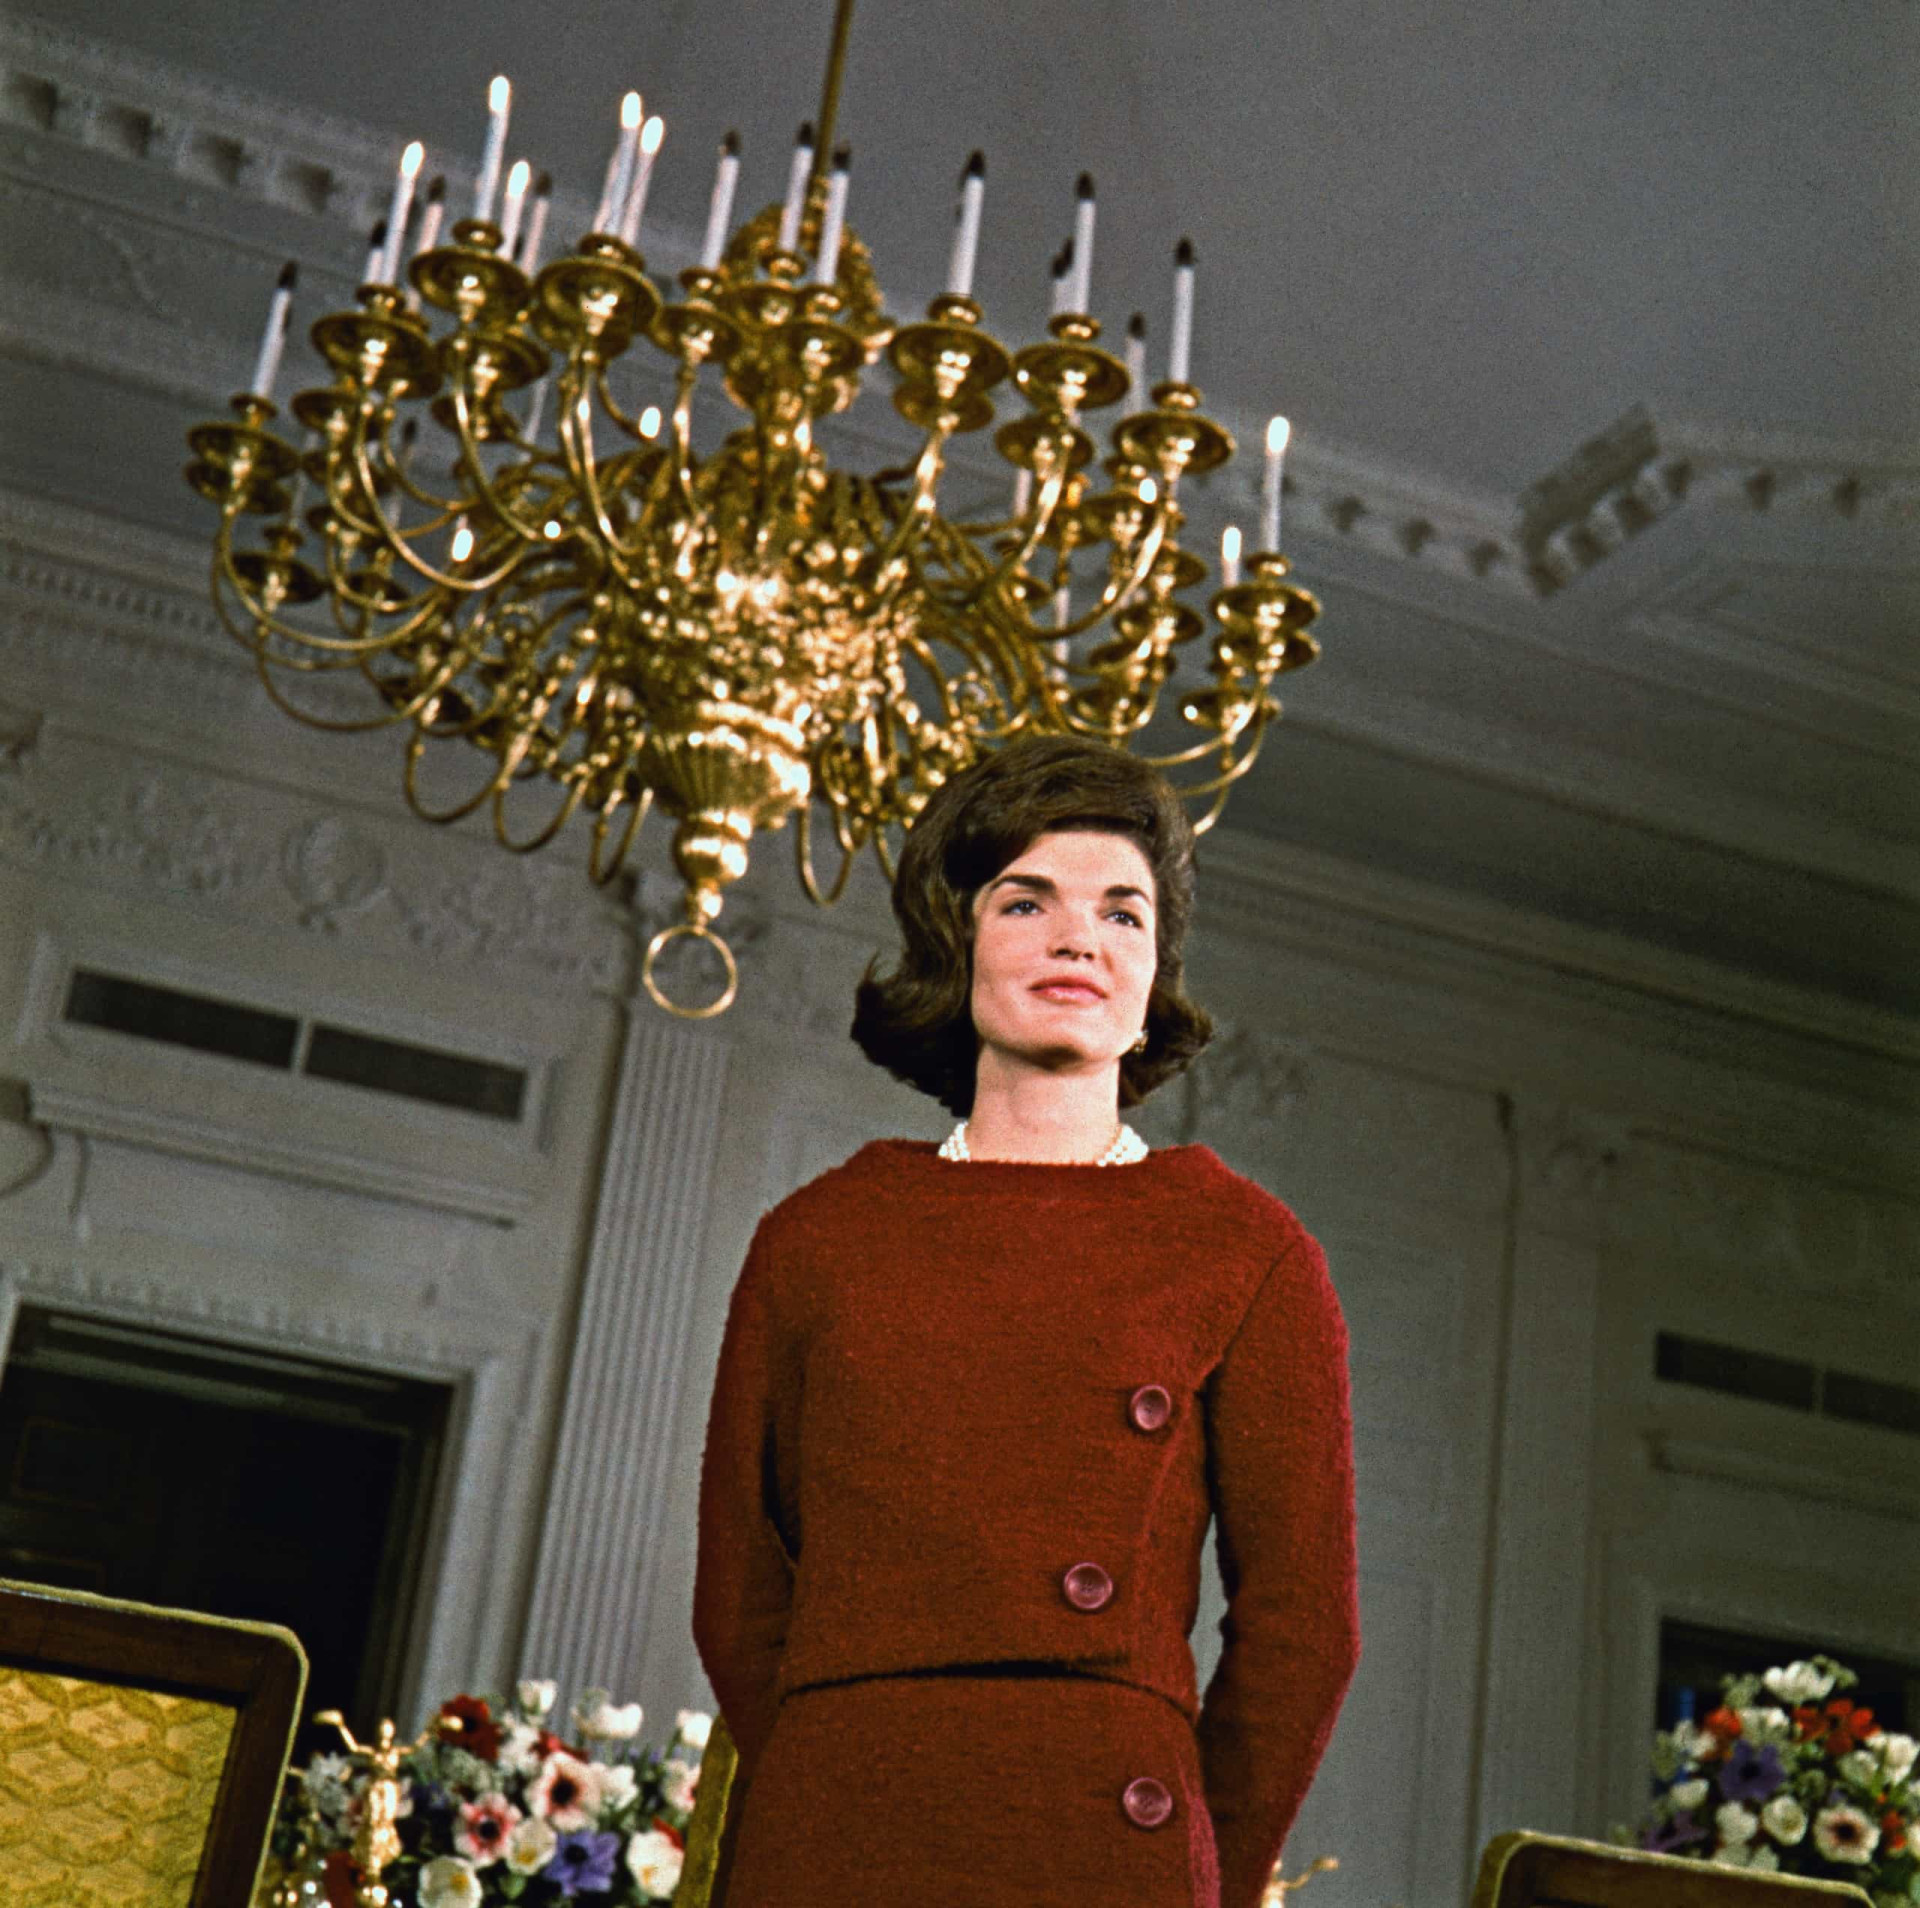 <p>Reportedly, Jackie Kennedy didn't like the title and thought it sounded "like a saddle horse." She preferred to be called Mrs. Kennedy.</p><p>You may also like:<a href="https://www.starsinsider.com/n/489501?utm_source=msn.com&utm_medium=display&utm_campaign=referral_description&utm_content=465881v2en-us"> Scandals that the Catholic Church doesn't want you to know about</a></p>